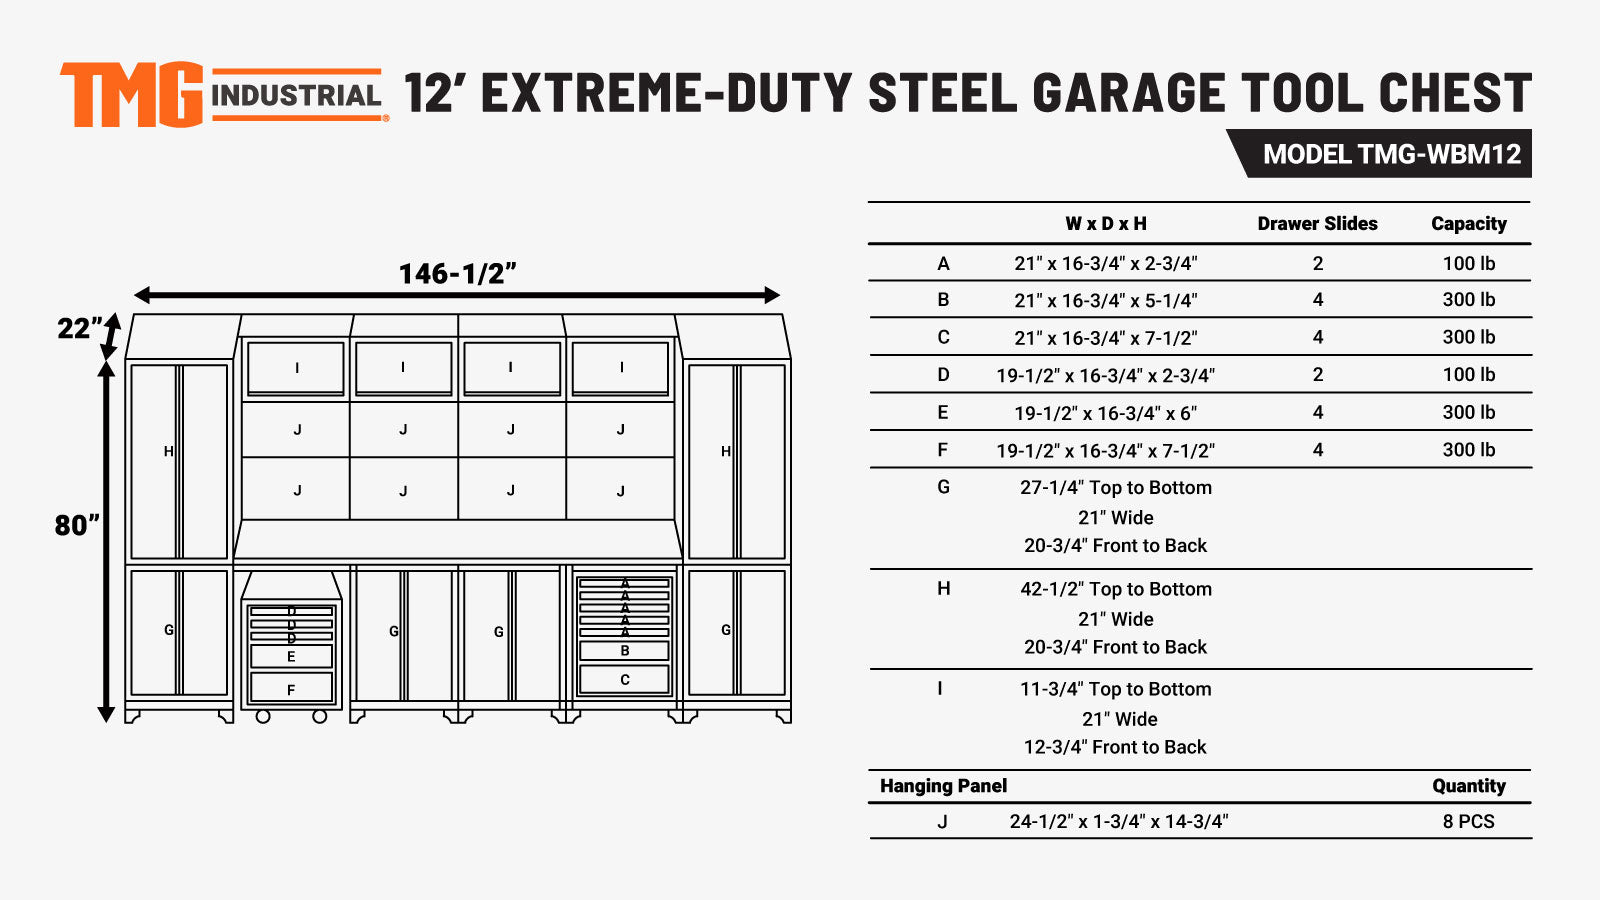 TMG Industrial 12’ Extreme-Duty Steel Garage Tool Chest w/Pegboard, Power Outlets, USB Port, Magnetic Motion LED Lamps, Cabinets & Roll-Out Tool Chest, TMG-WBM12-specifications-image